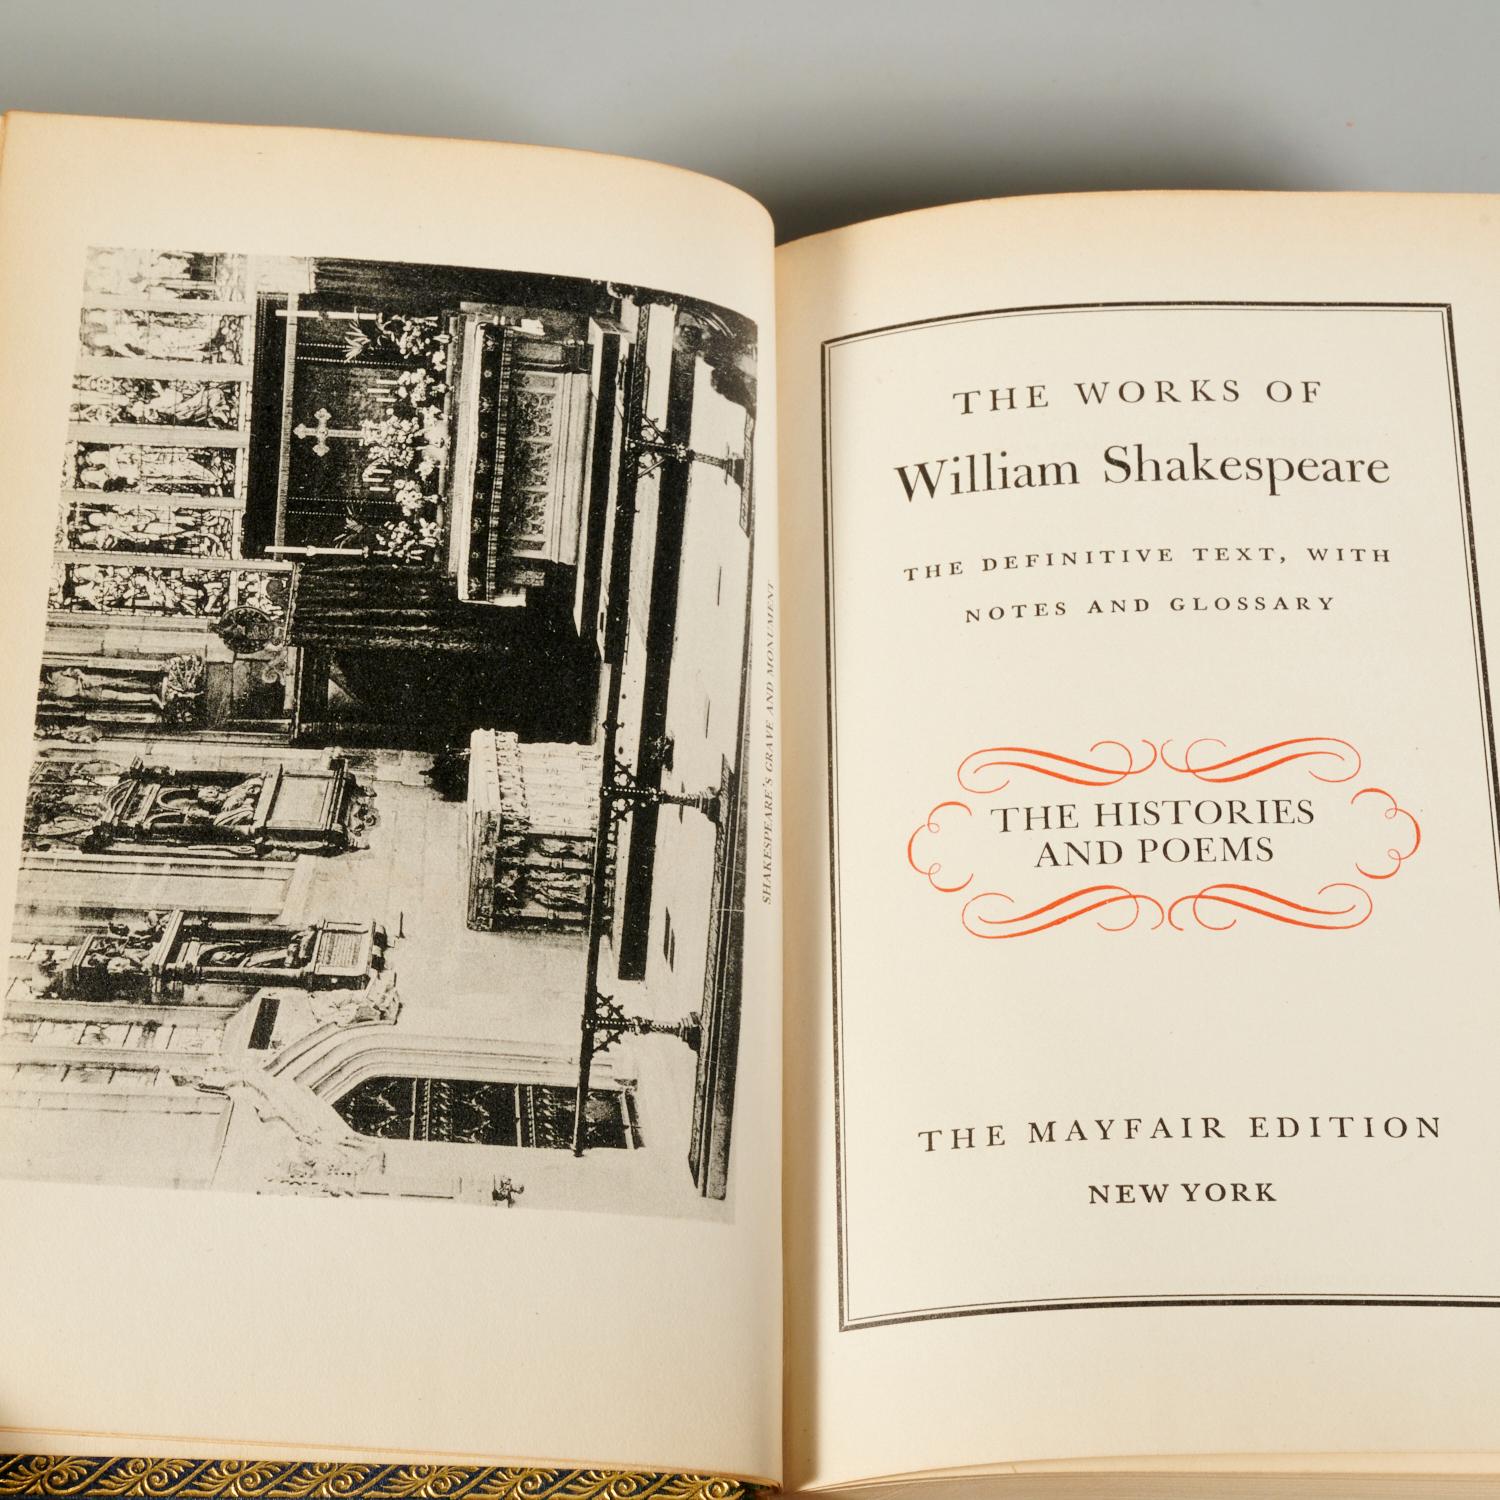 The Works of William Shakespeare - The Definitive Text, With Notes and Glossary, The Mayfair Edition, New York Three small octavo volumes, Tragedies, Comedies and Histories and Poems, bound by hand for the publisher, per the copyright page, by A.